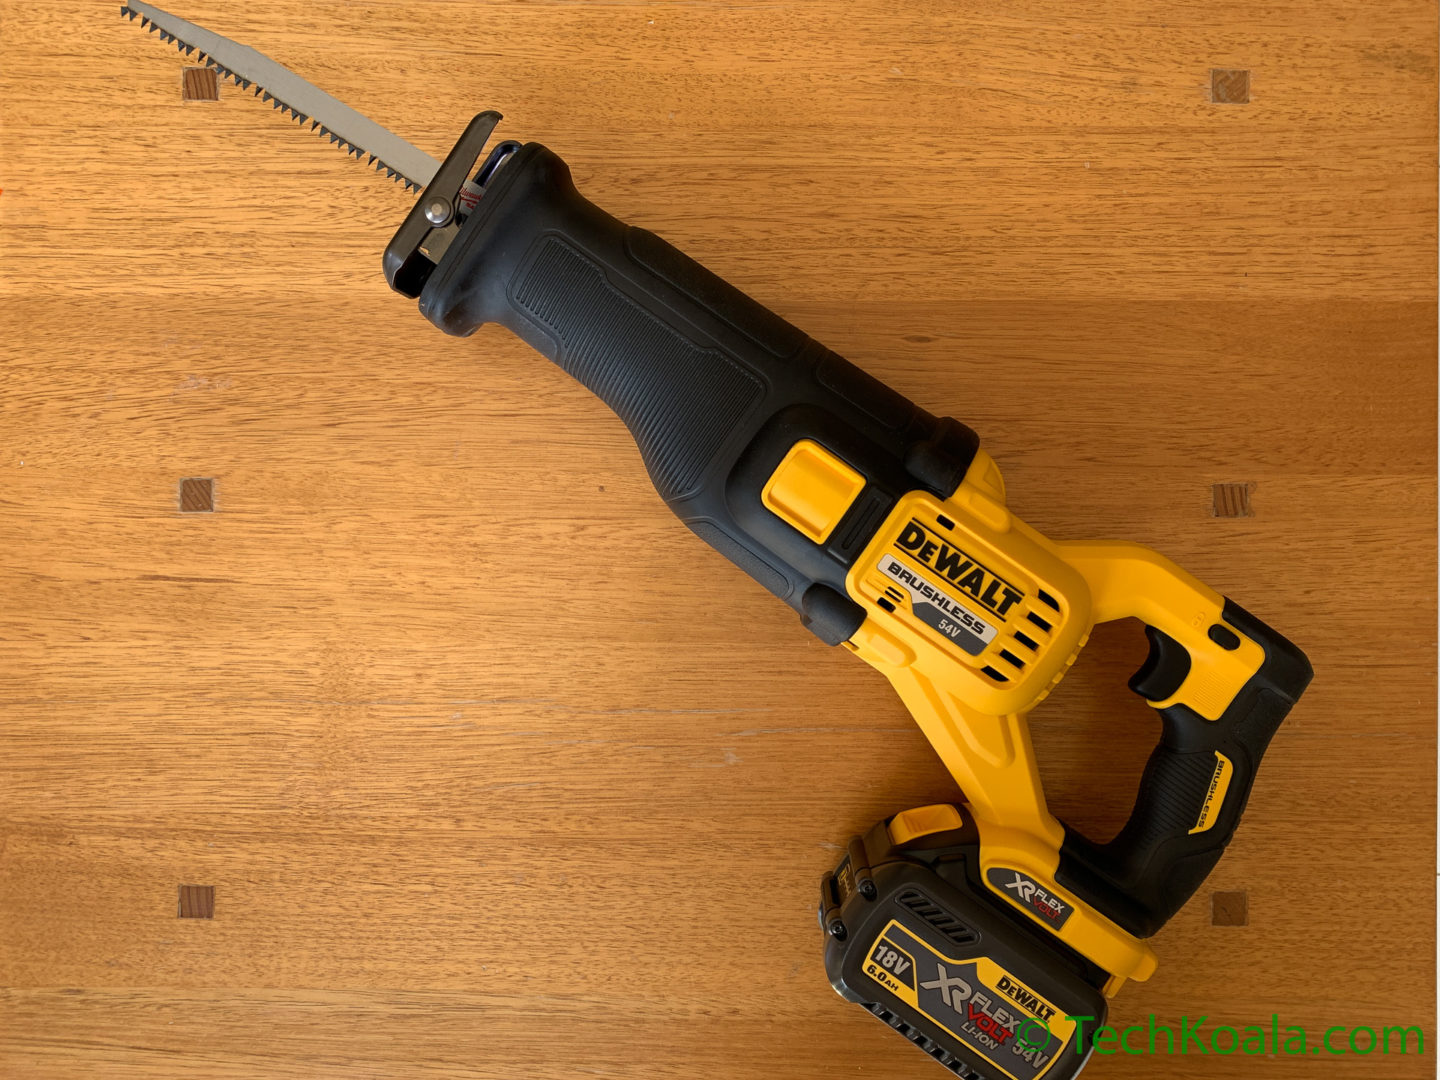 Dewalt 54V Cordless Brushless Reciprocating Saw DCS388N - Packaging and